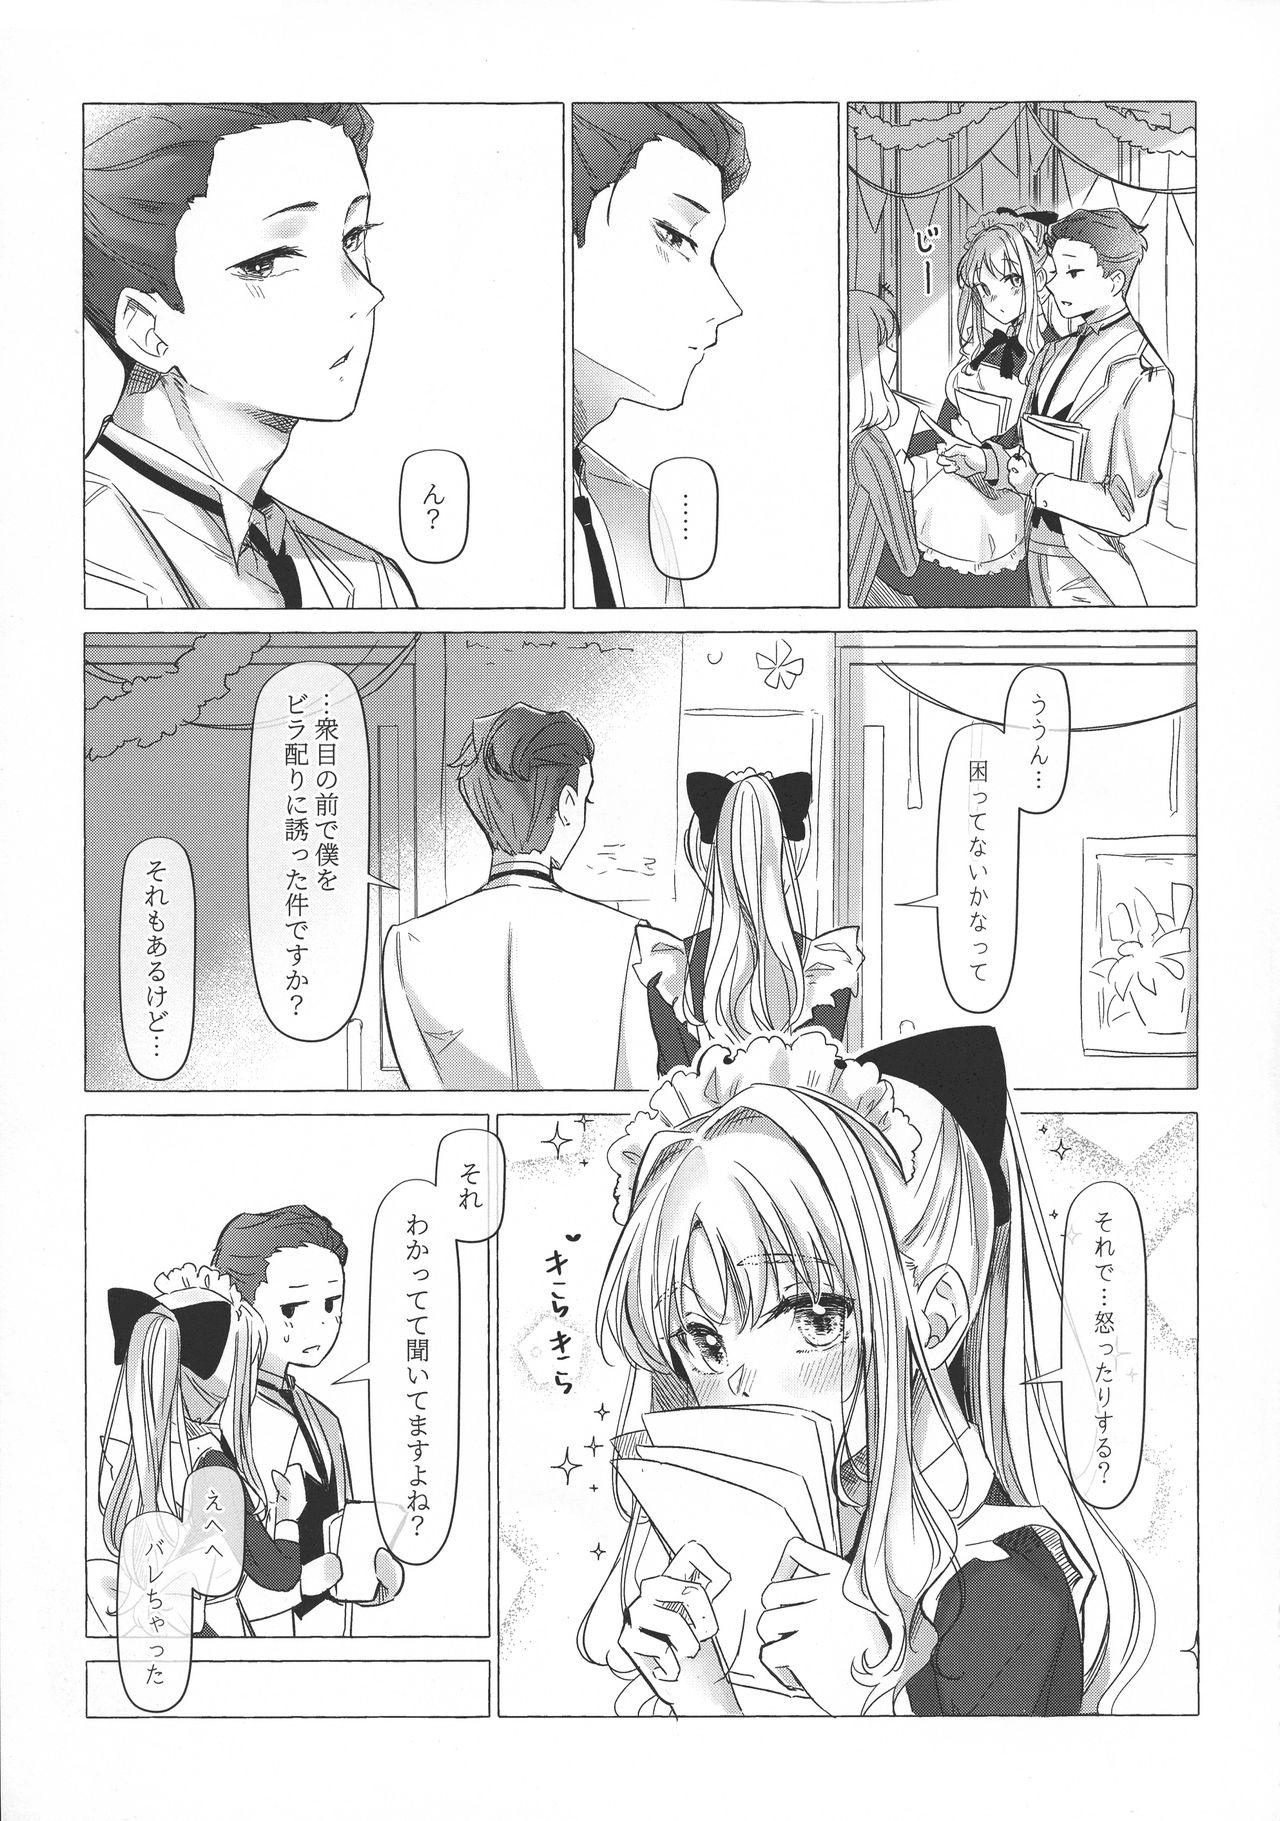 Plump 満心総意の躾 - Darling in the franxx Rola - Page 6